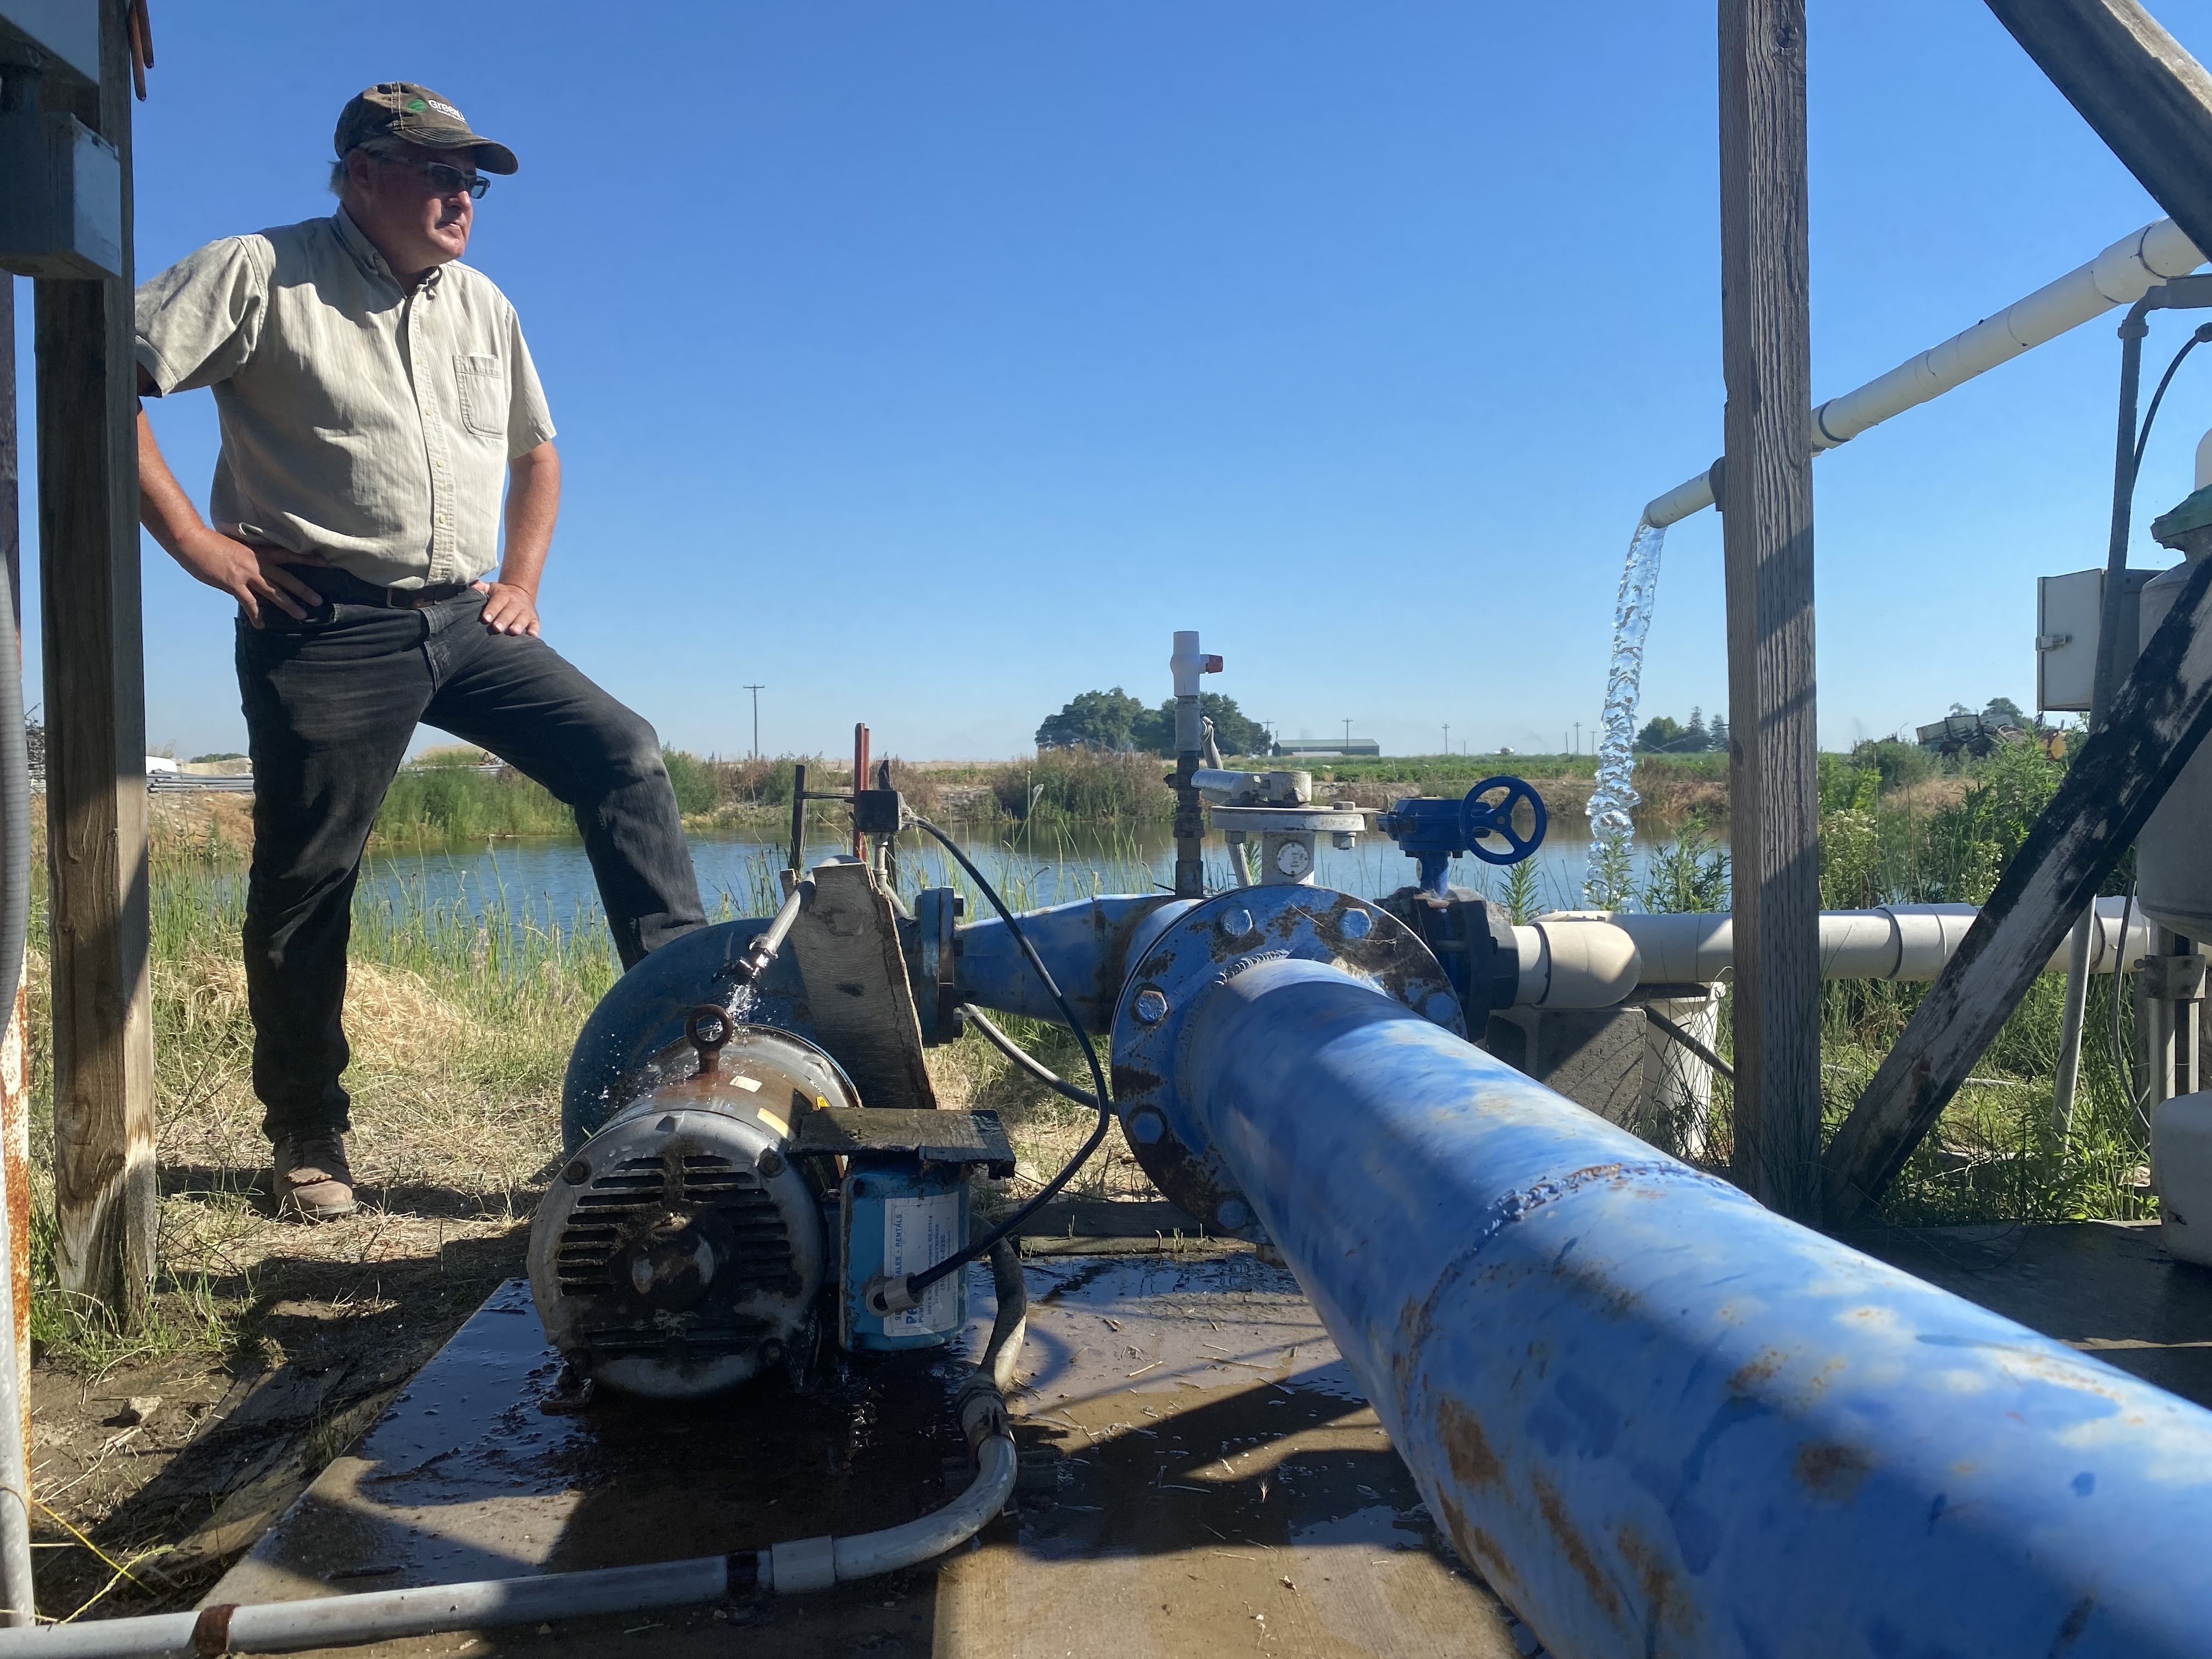 Alan Schreiber inspects his broken irrigation pump. It's only working at 30 percent capacity in 117 heat. CREDIT: Anna King/N3